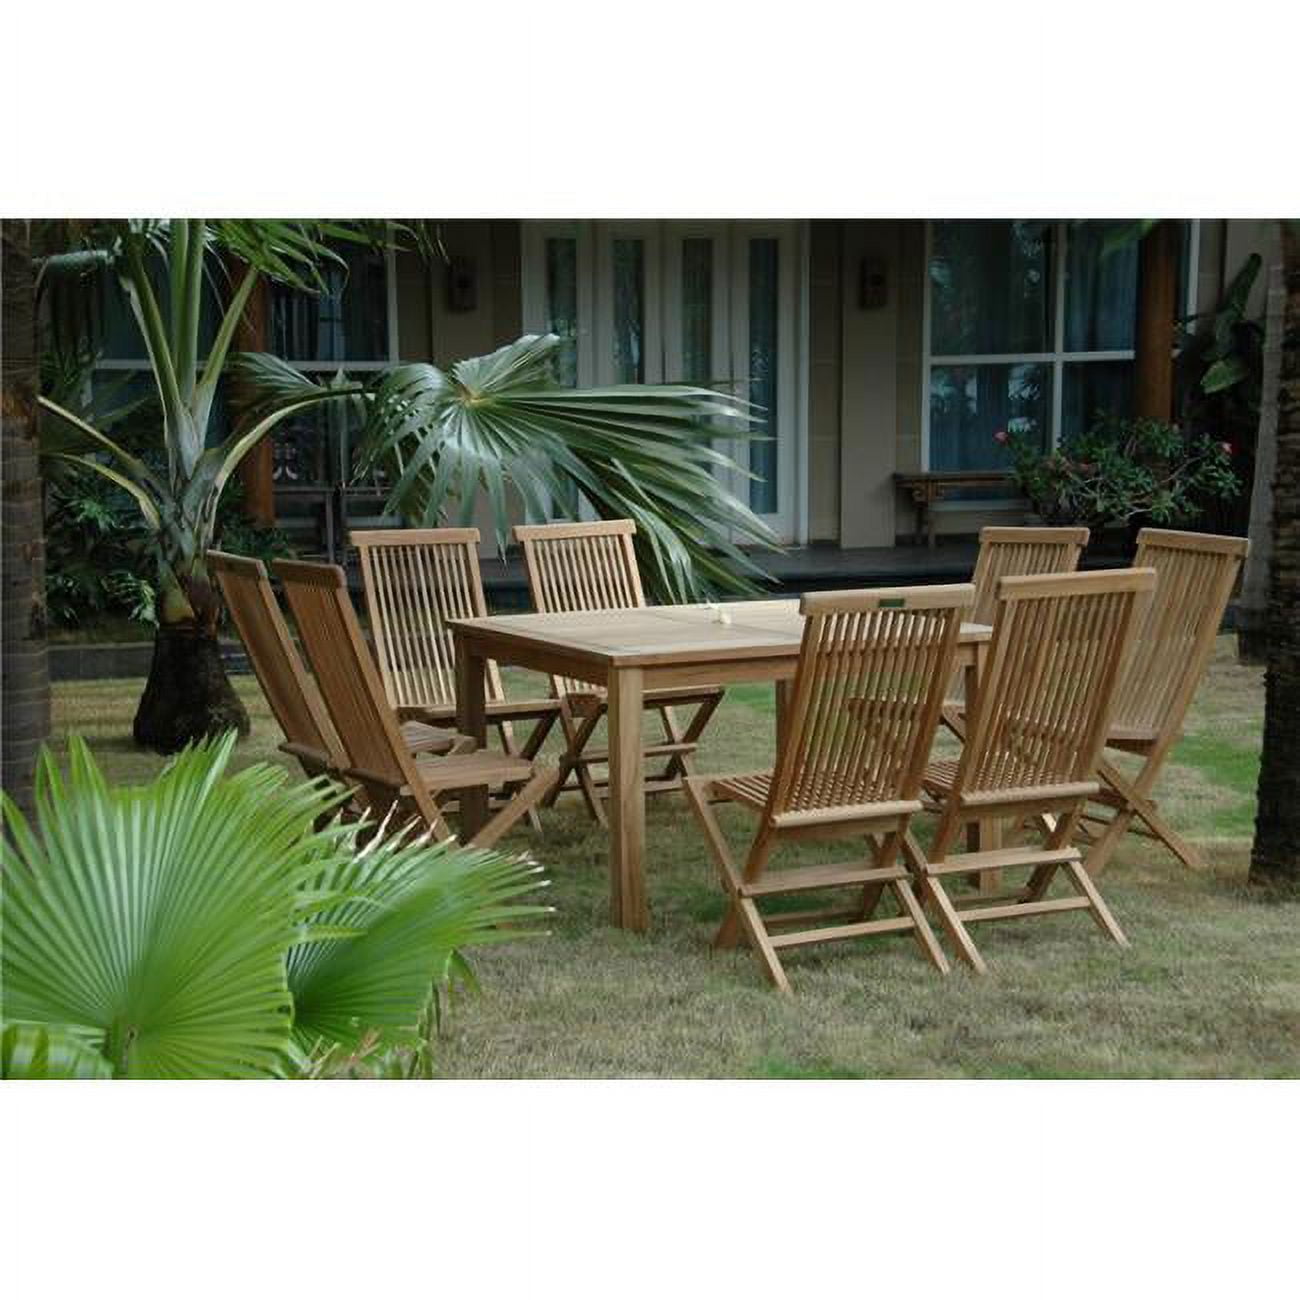 Picture of Anderson Teak Set-104B Classic Folding Chair - Pack of 8